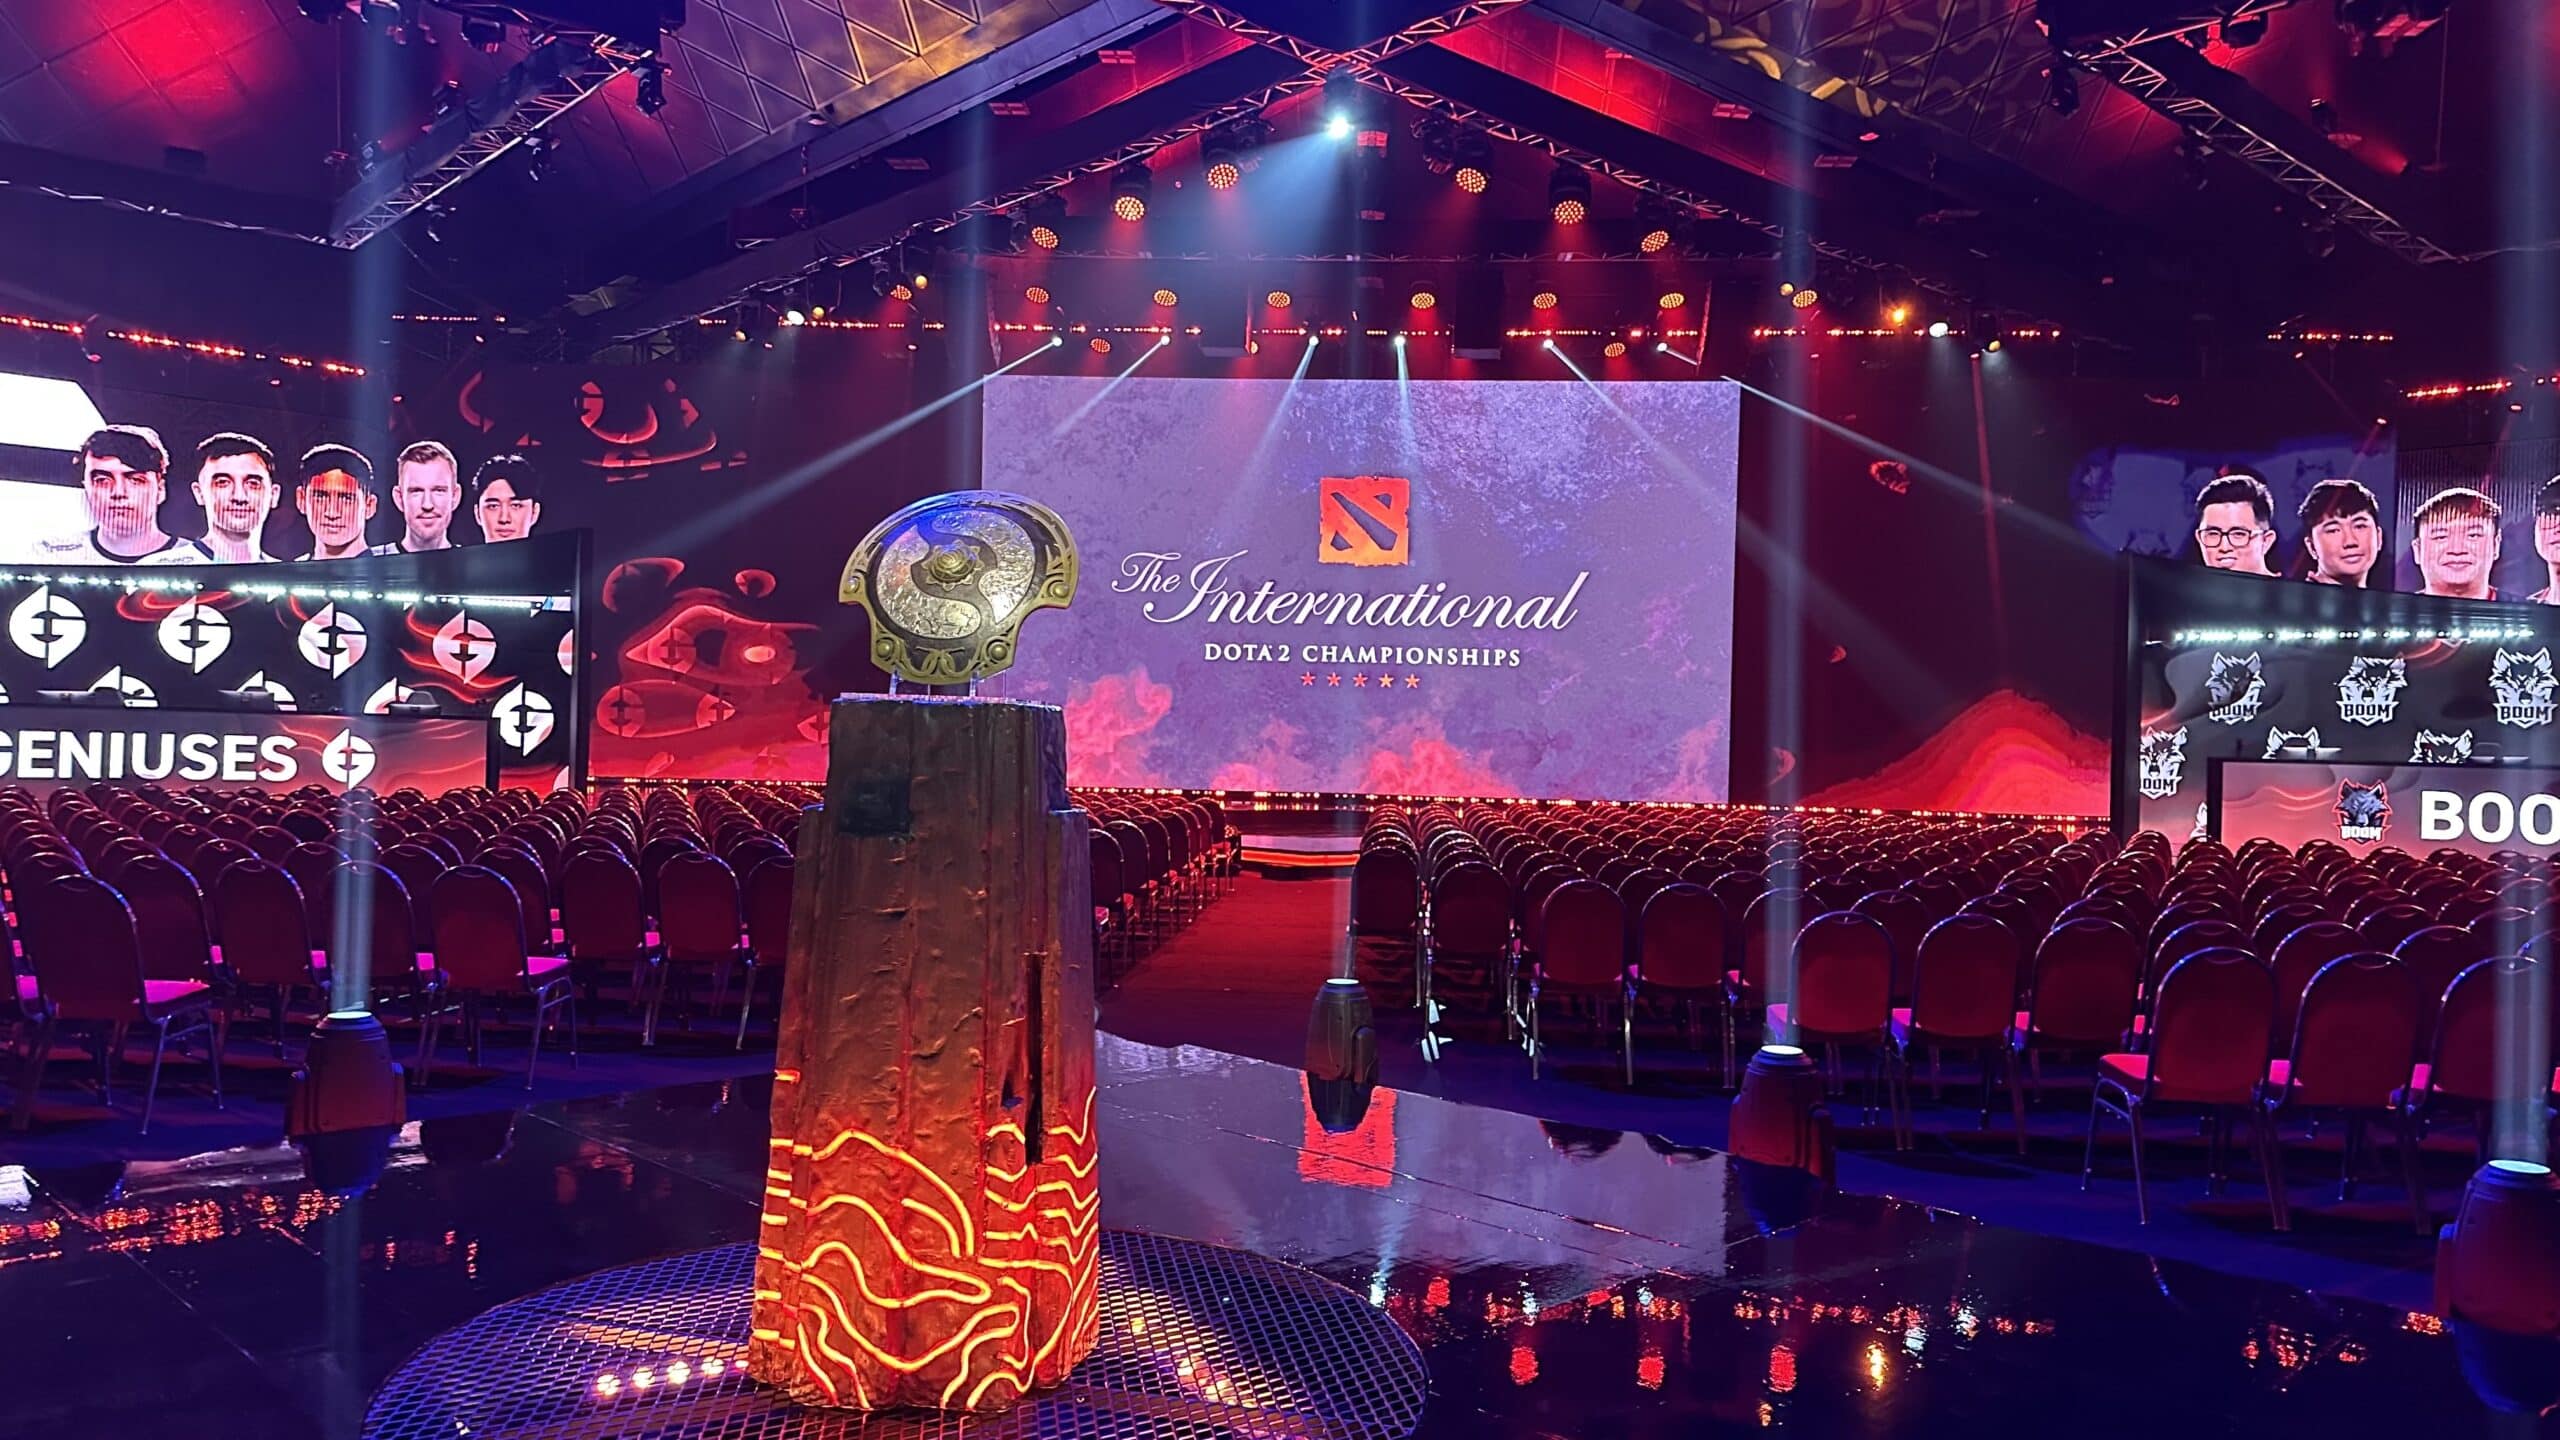 Closer shot of the trophy for the winner of the the DOTA 2 World Championships